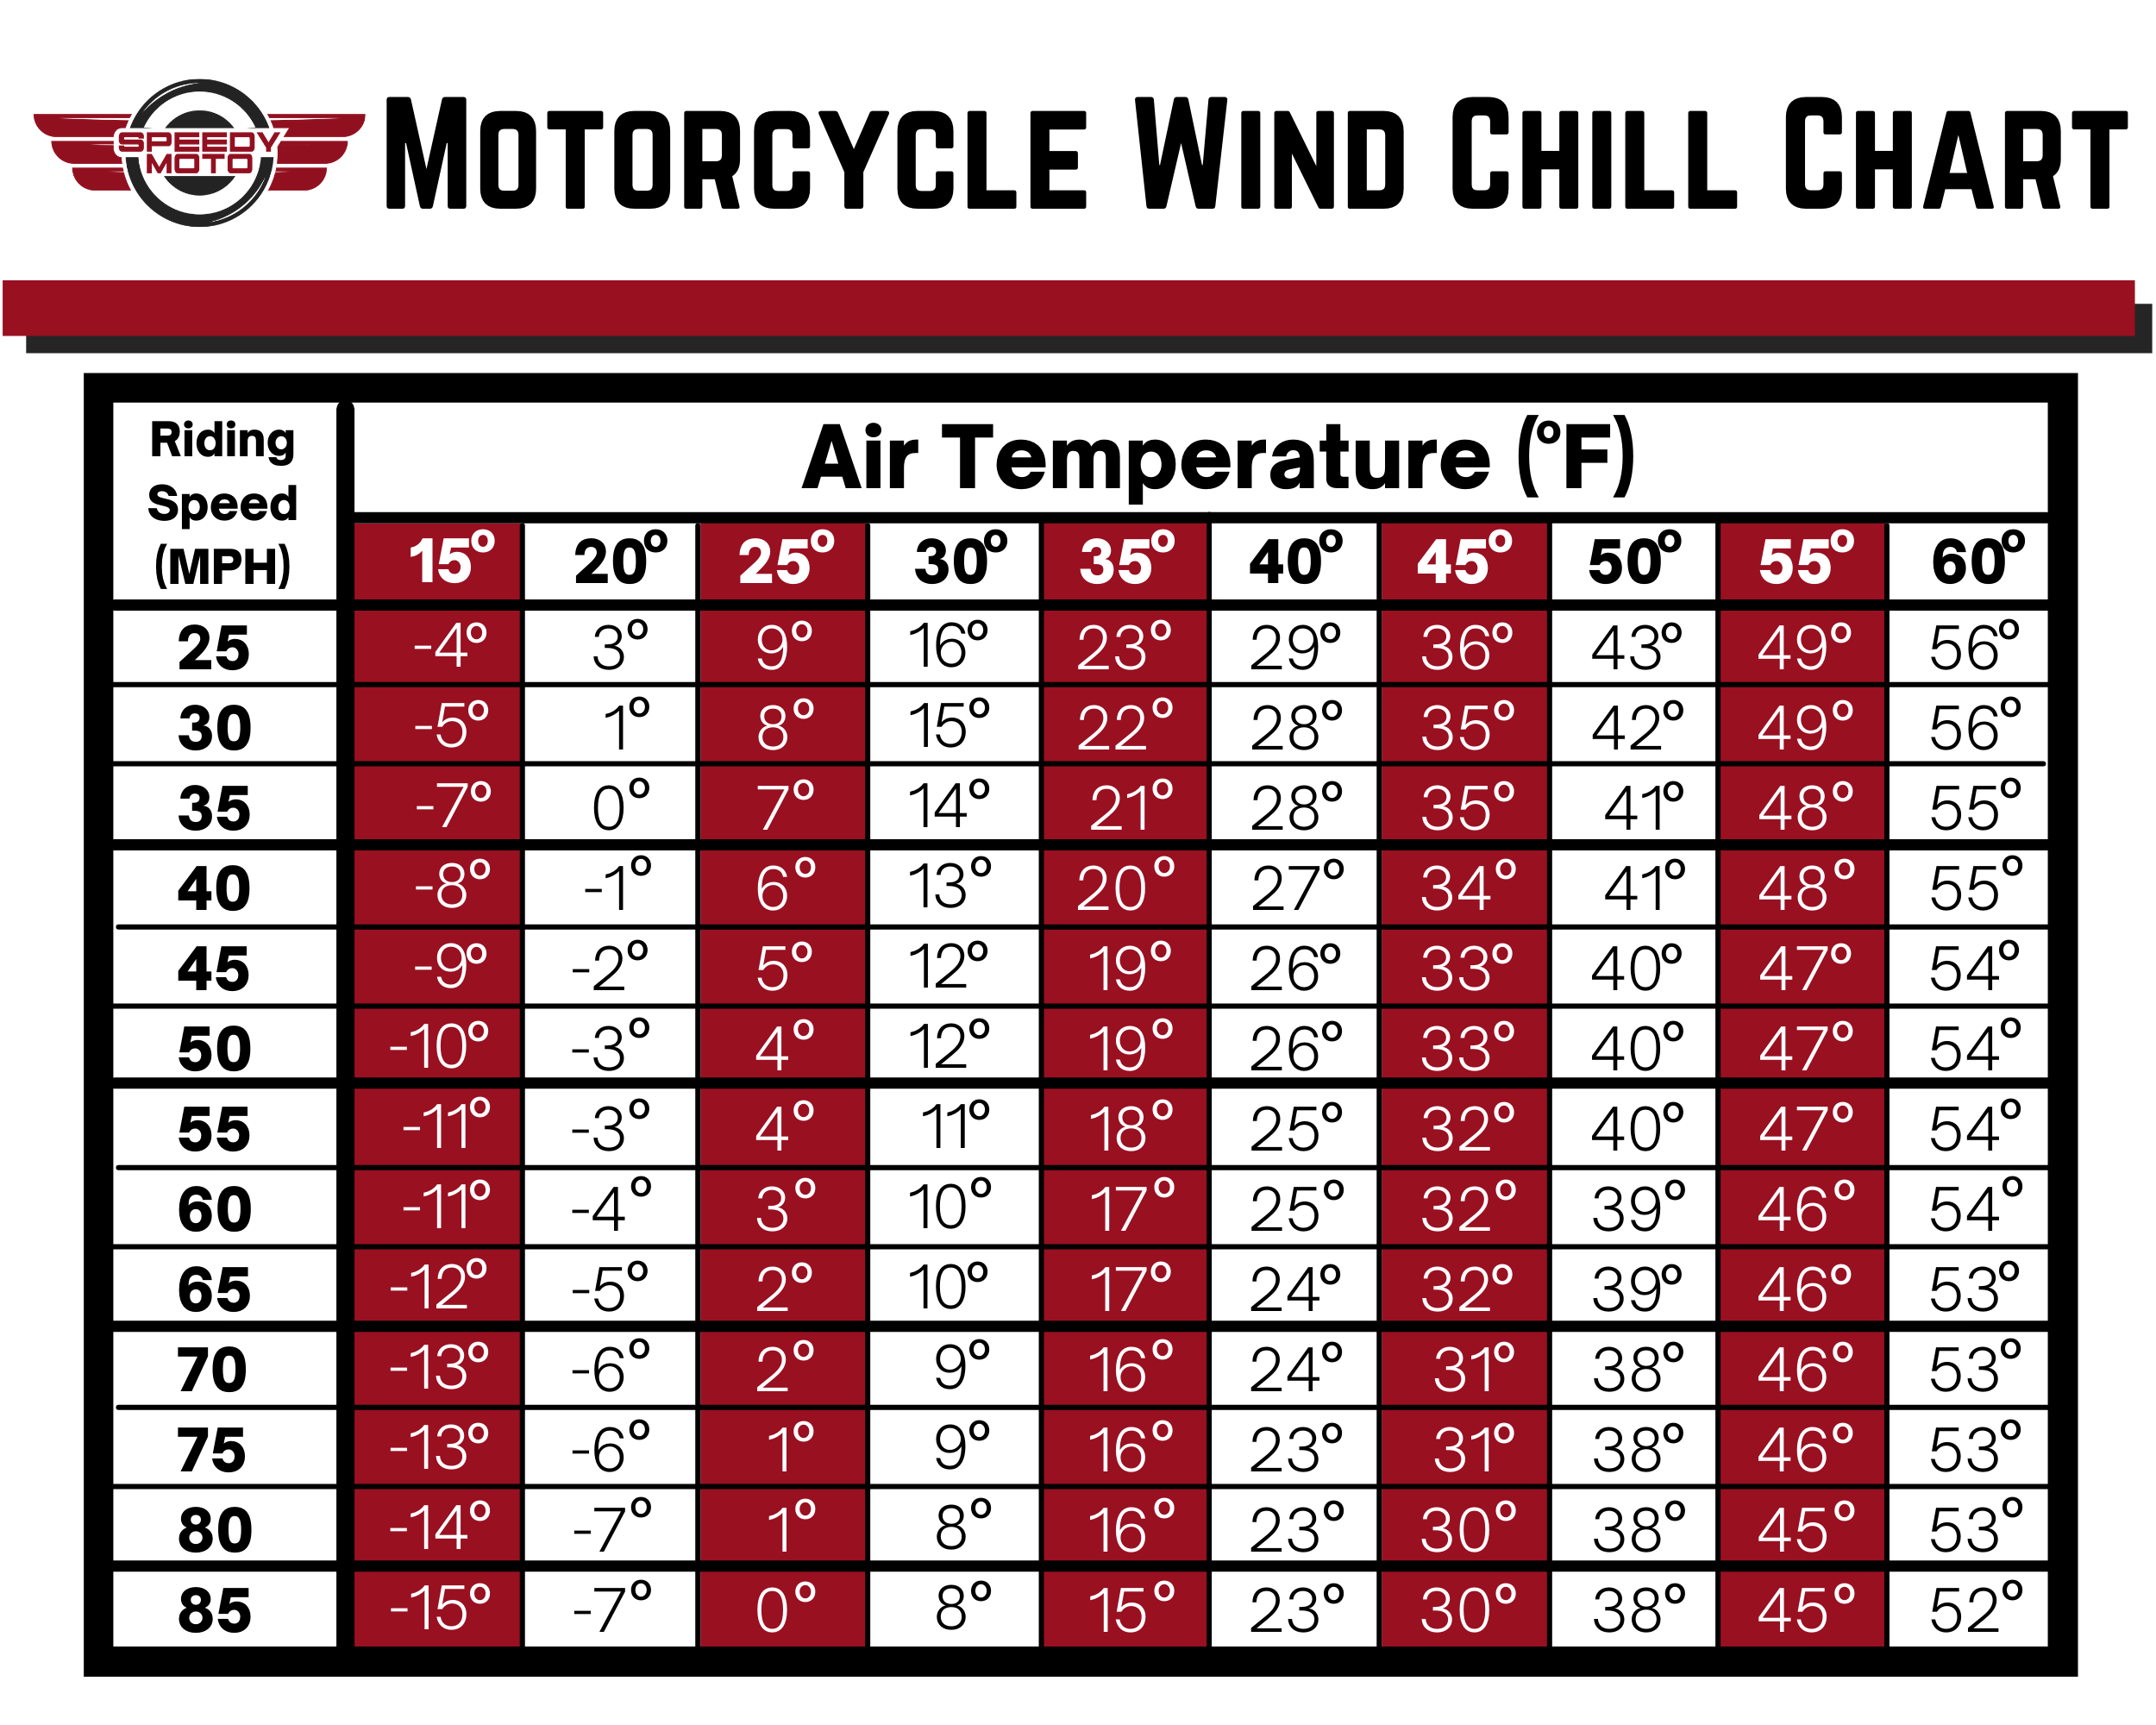 noaa national weather service wind chill chart